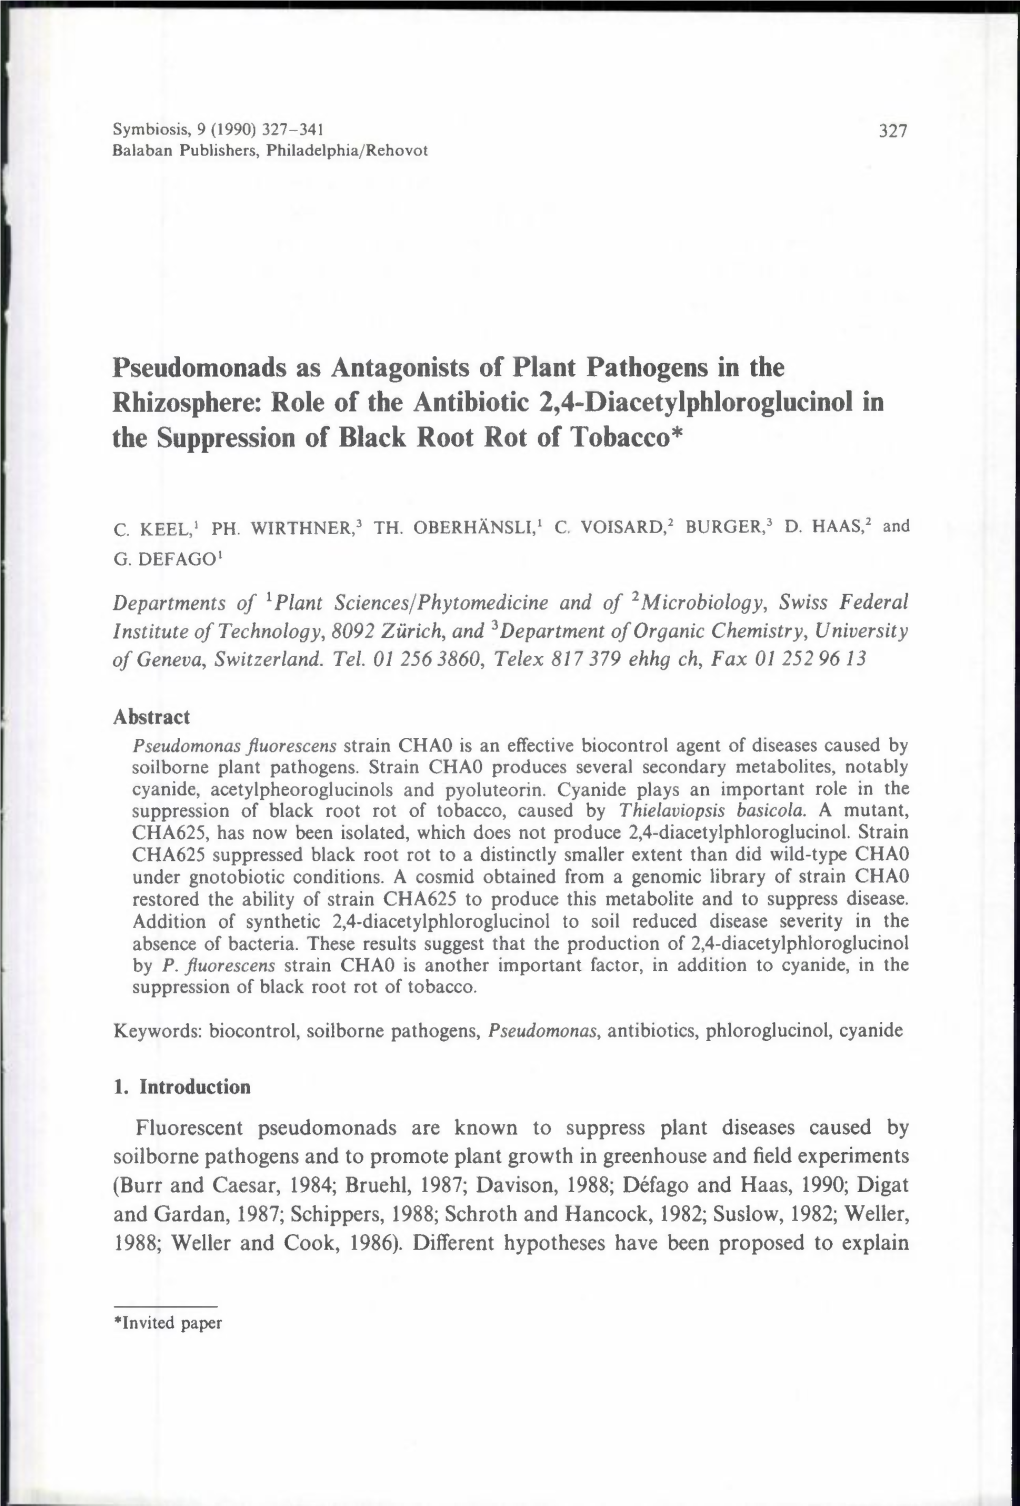 Pseudomonads As Antagonists of Plant Pathogens in the Rhizosphere: Role of the Antibiotic 2,4-Diacetylphloroglucinol in the Suppression of Black Root Rot of Tobacco*